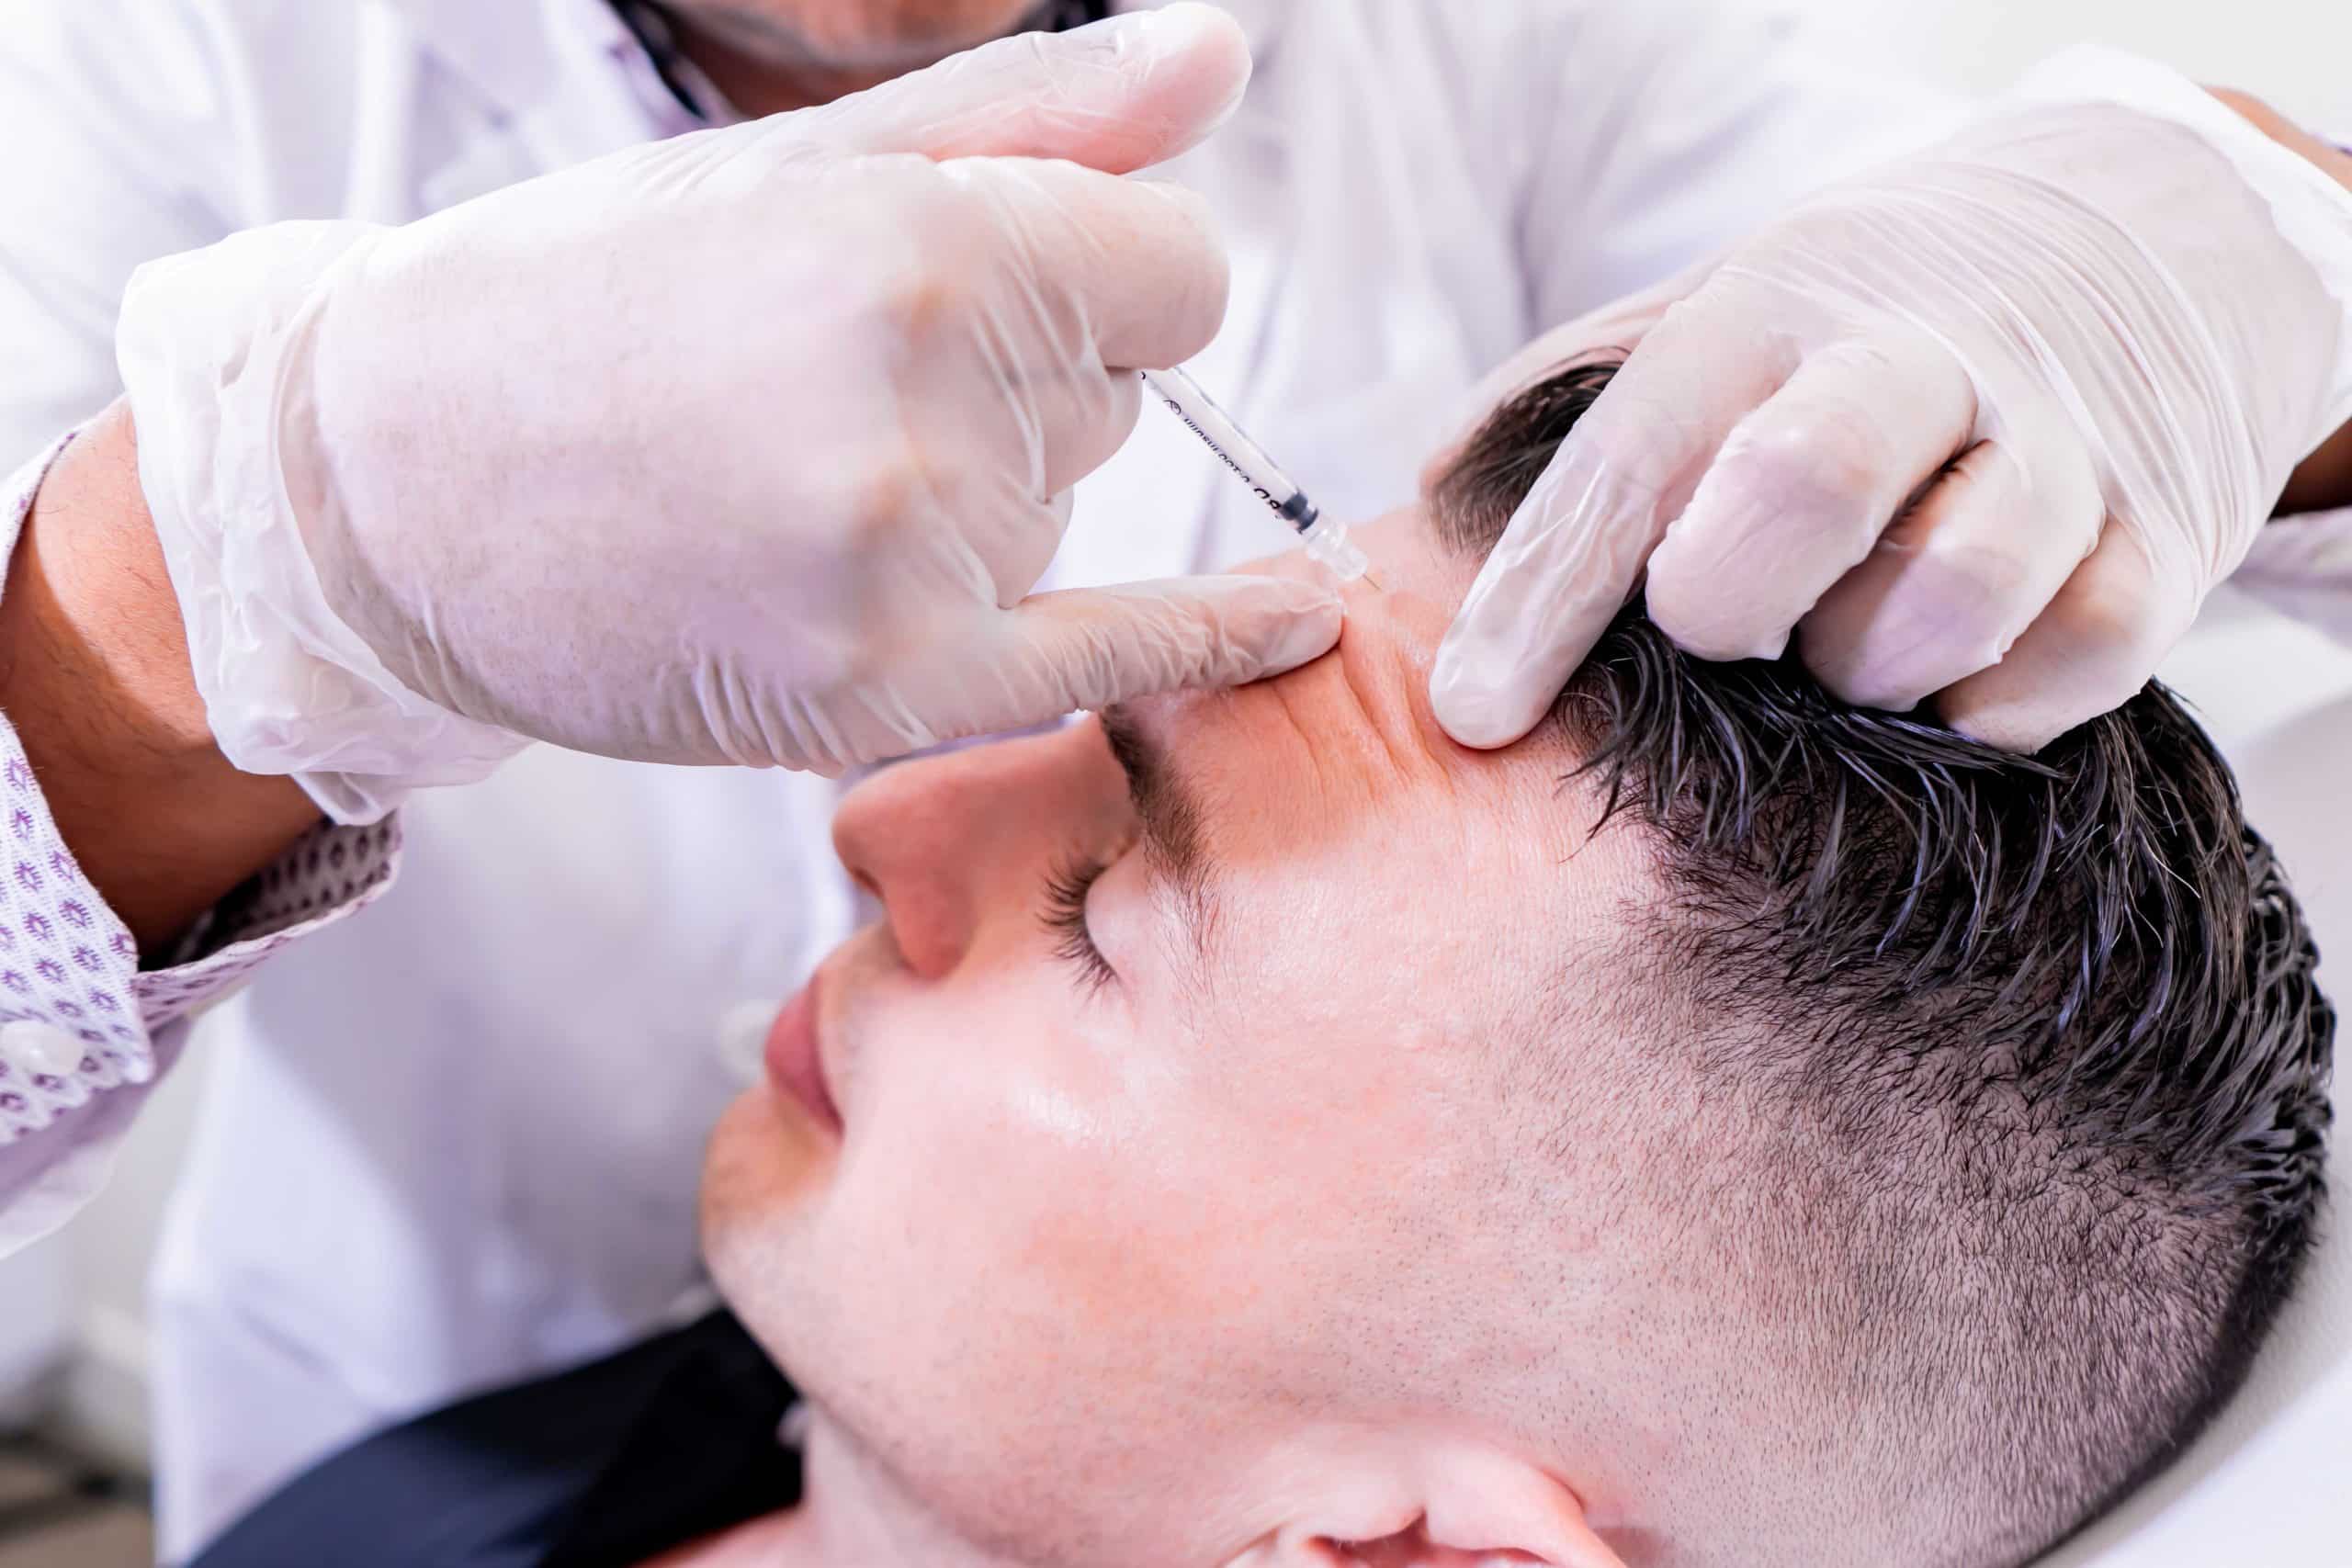 Young handsome man getting botox injection on forehead | La Lumiere Esthetique in Dallas, TX